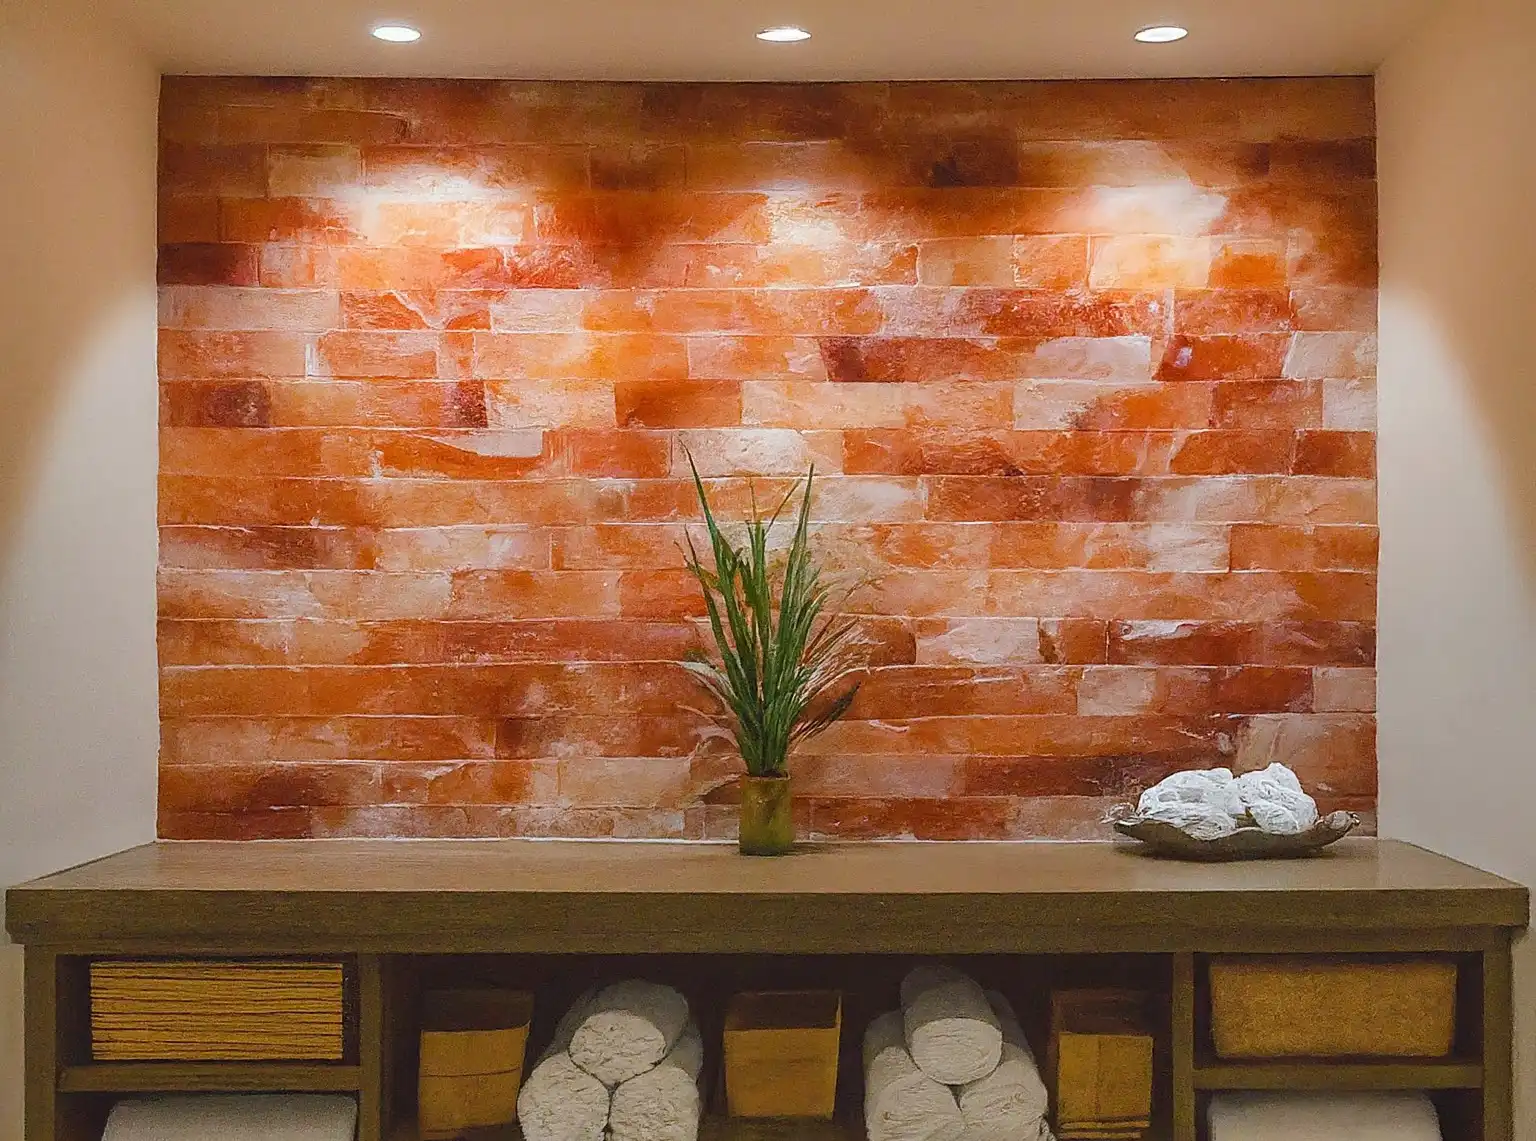 Image of a modern sauna featuring a sleek desk made of wood, positioned in front of a stunning wall crafted from glowing Himalayan salt bricks, creating a tranquil and therapeutic atmosphere.